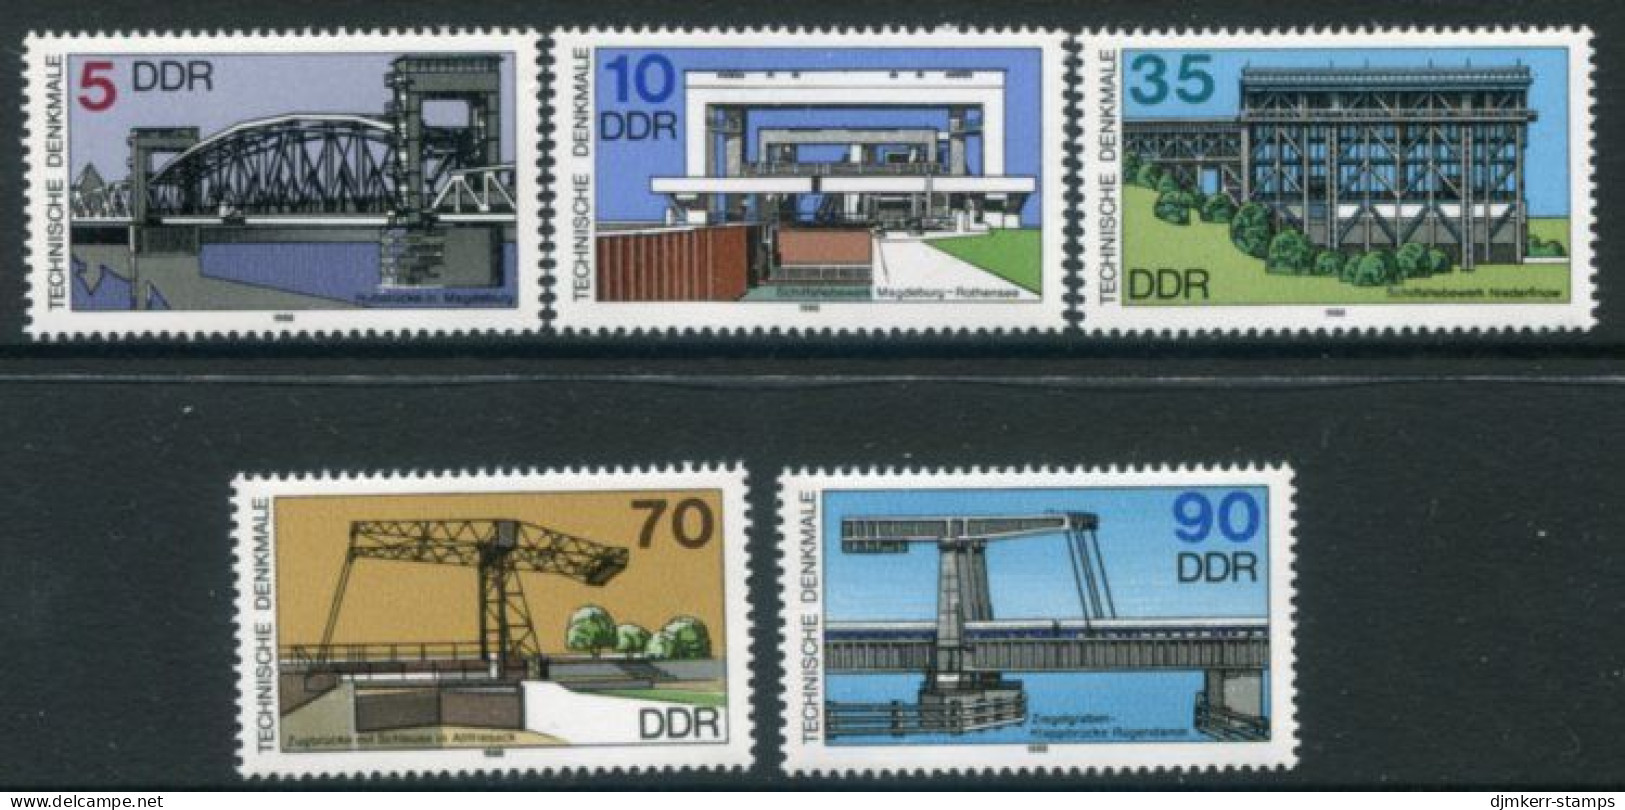 EAST GERMANY / DDR 1988 Ship Lifts MNH / ** .  Michel 3203-07 - Unused Stamps